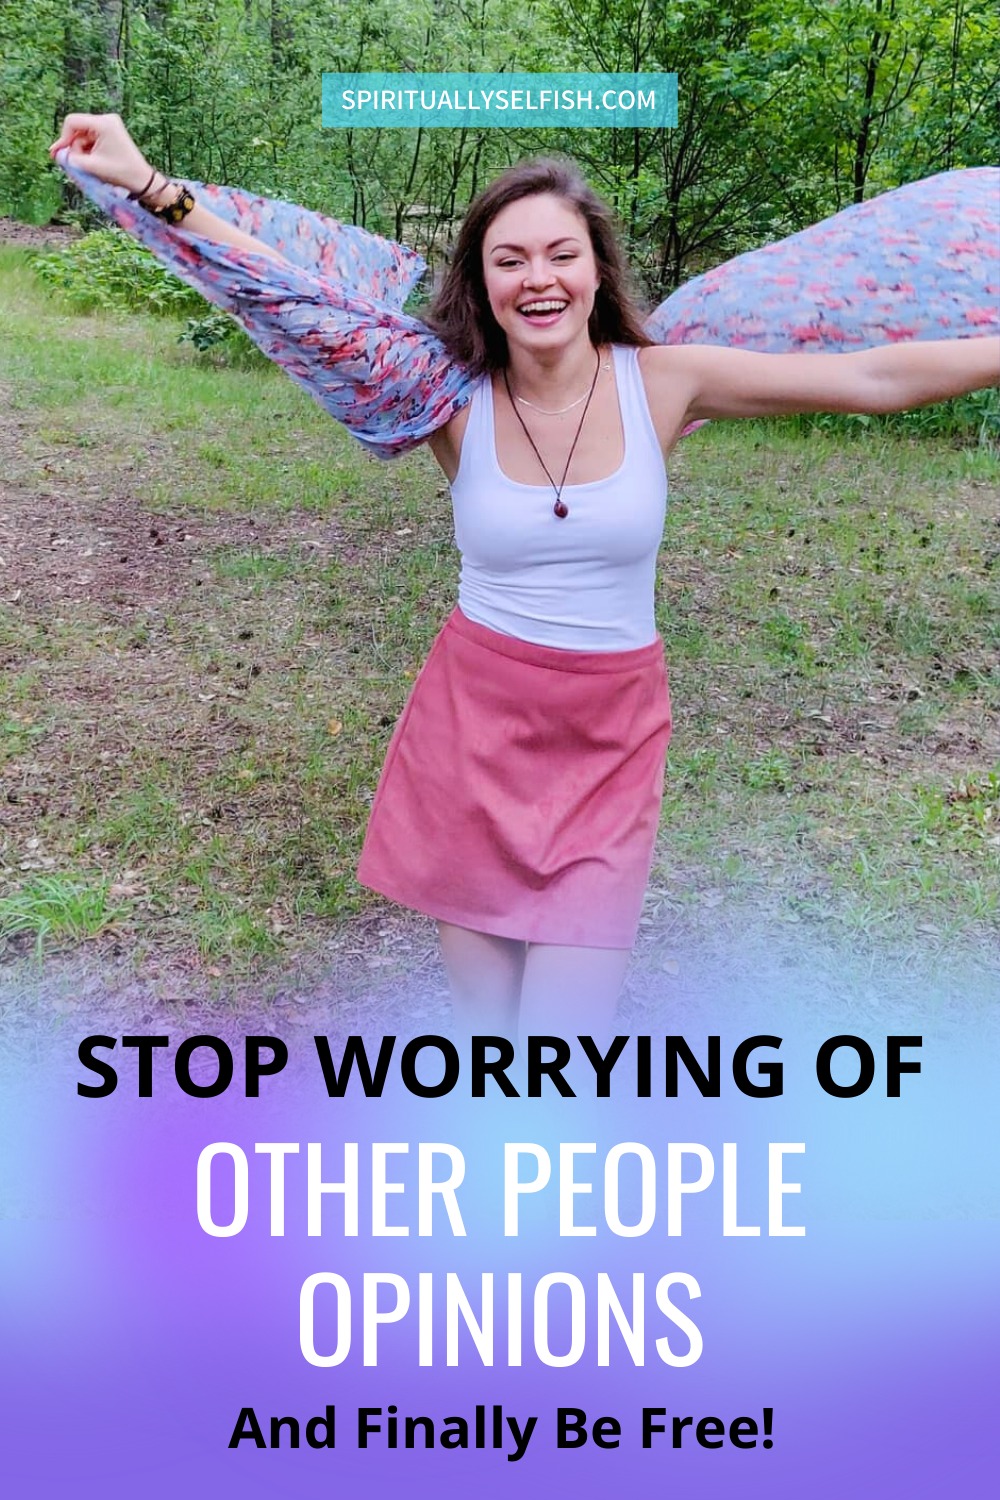 How To Stop Worrying About Other People's Opinions